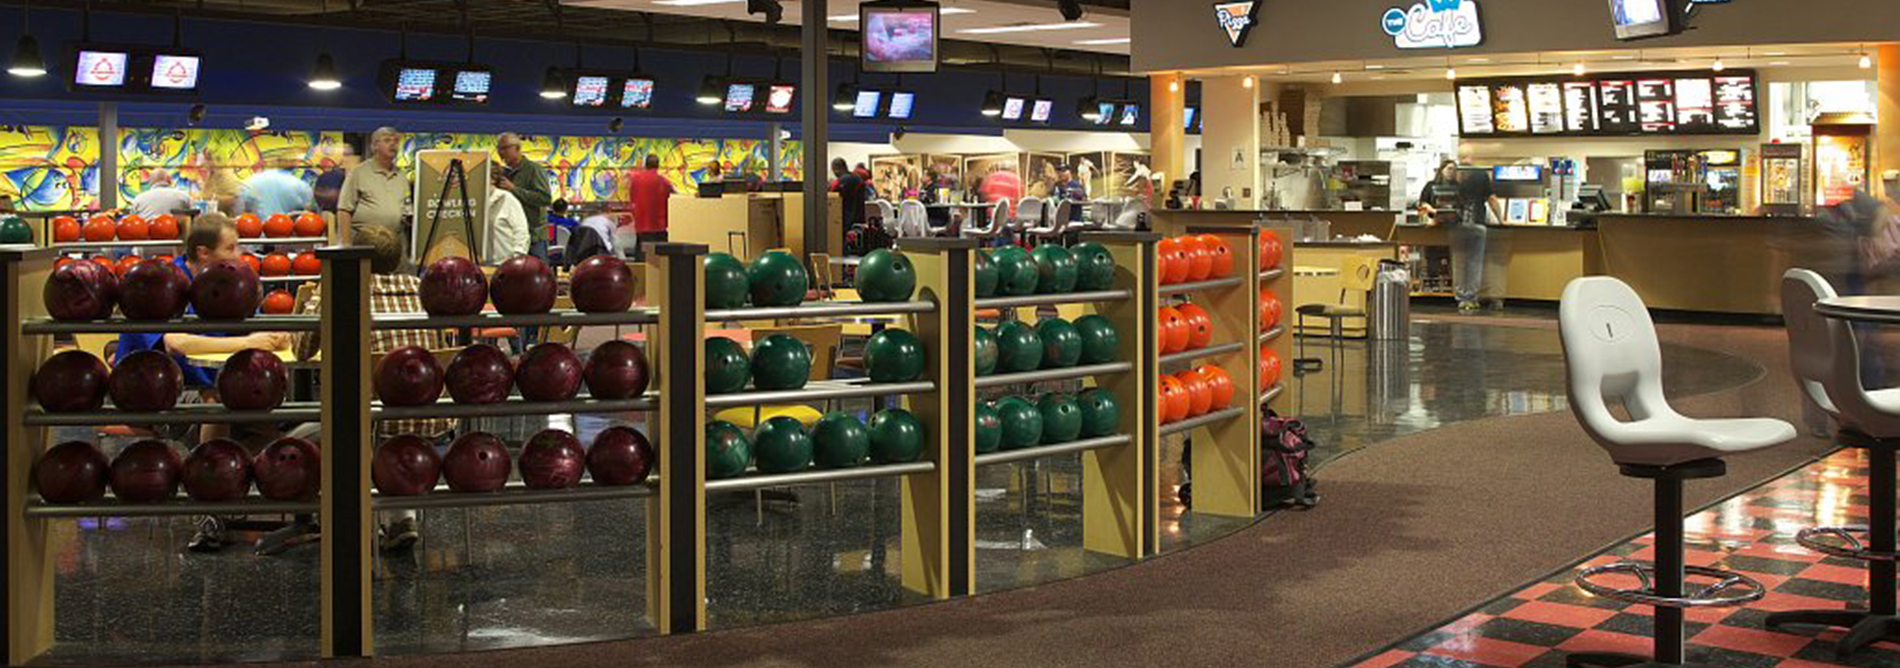 QUBICAAMF-bowling-Family-Entertainment-Center-Kingpin-Lanes-banner.jpg